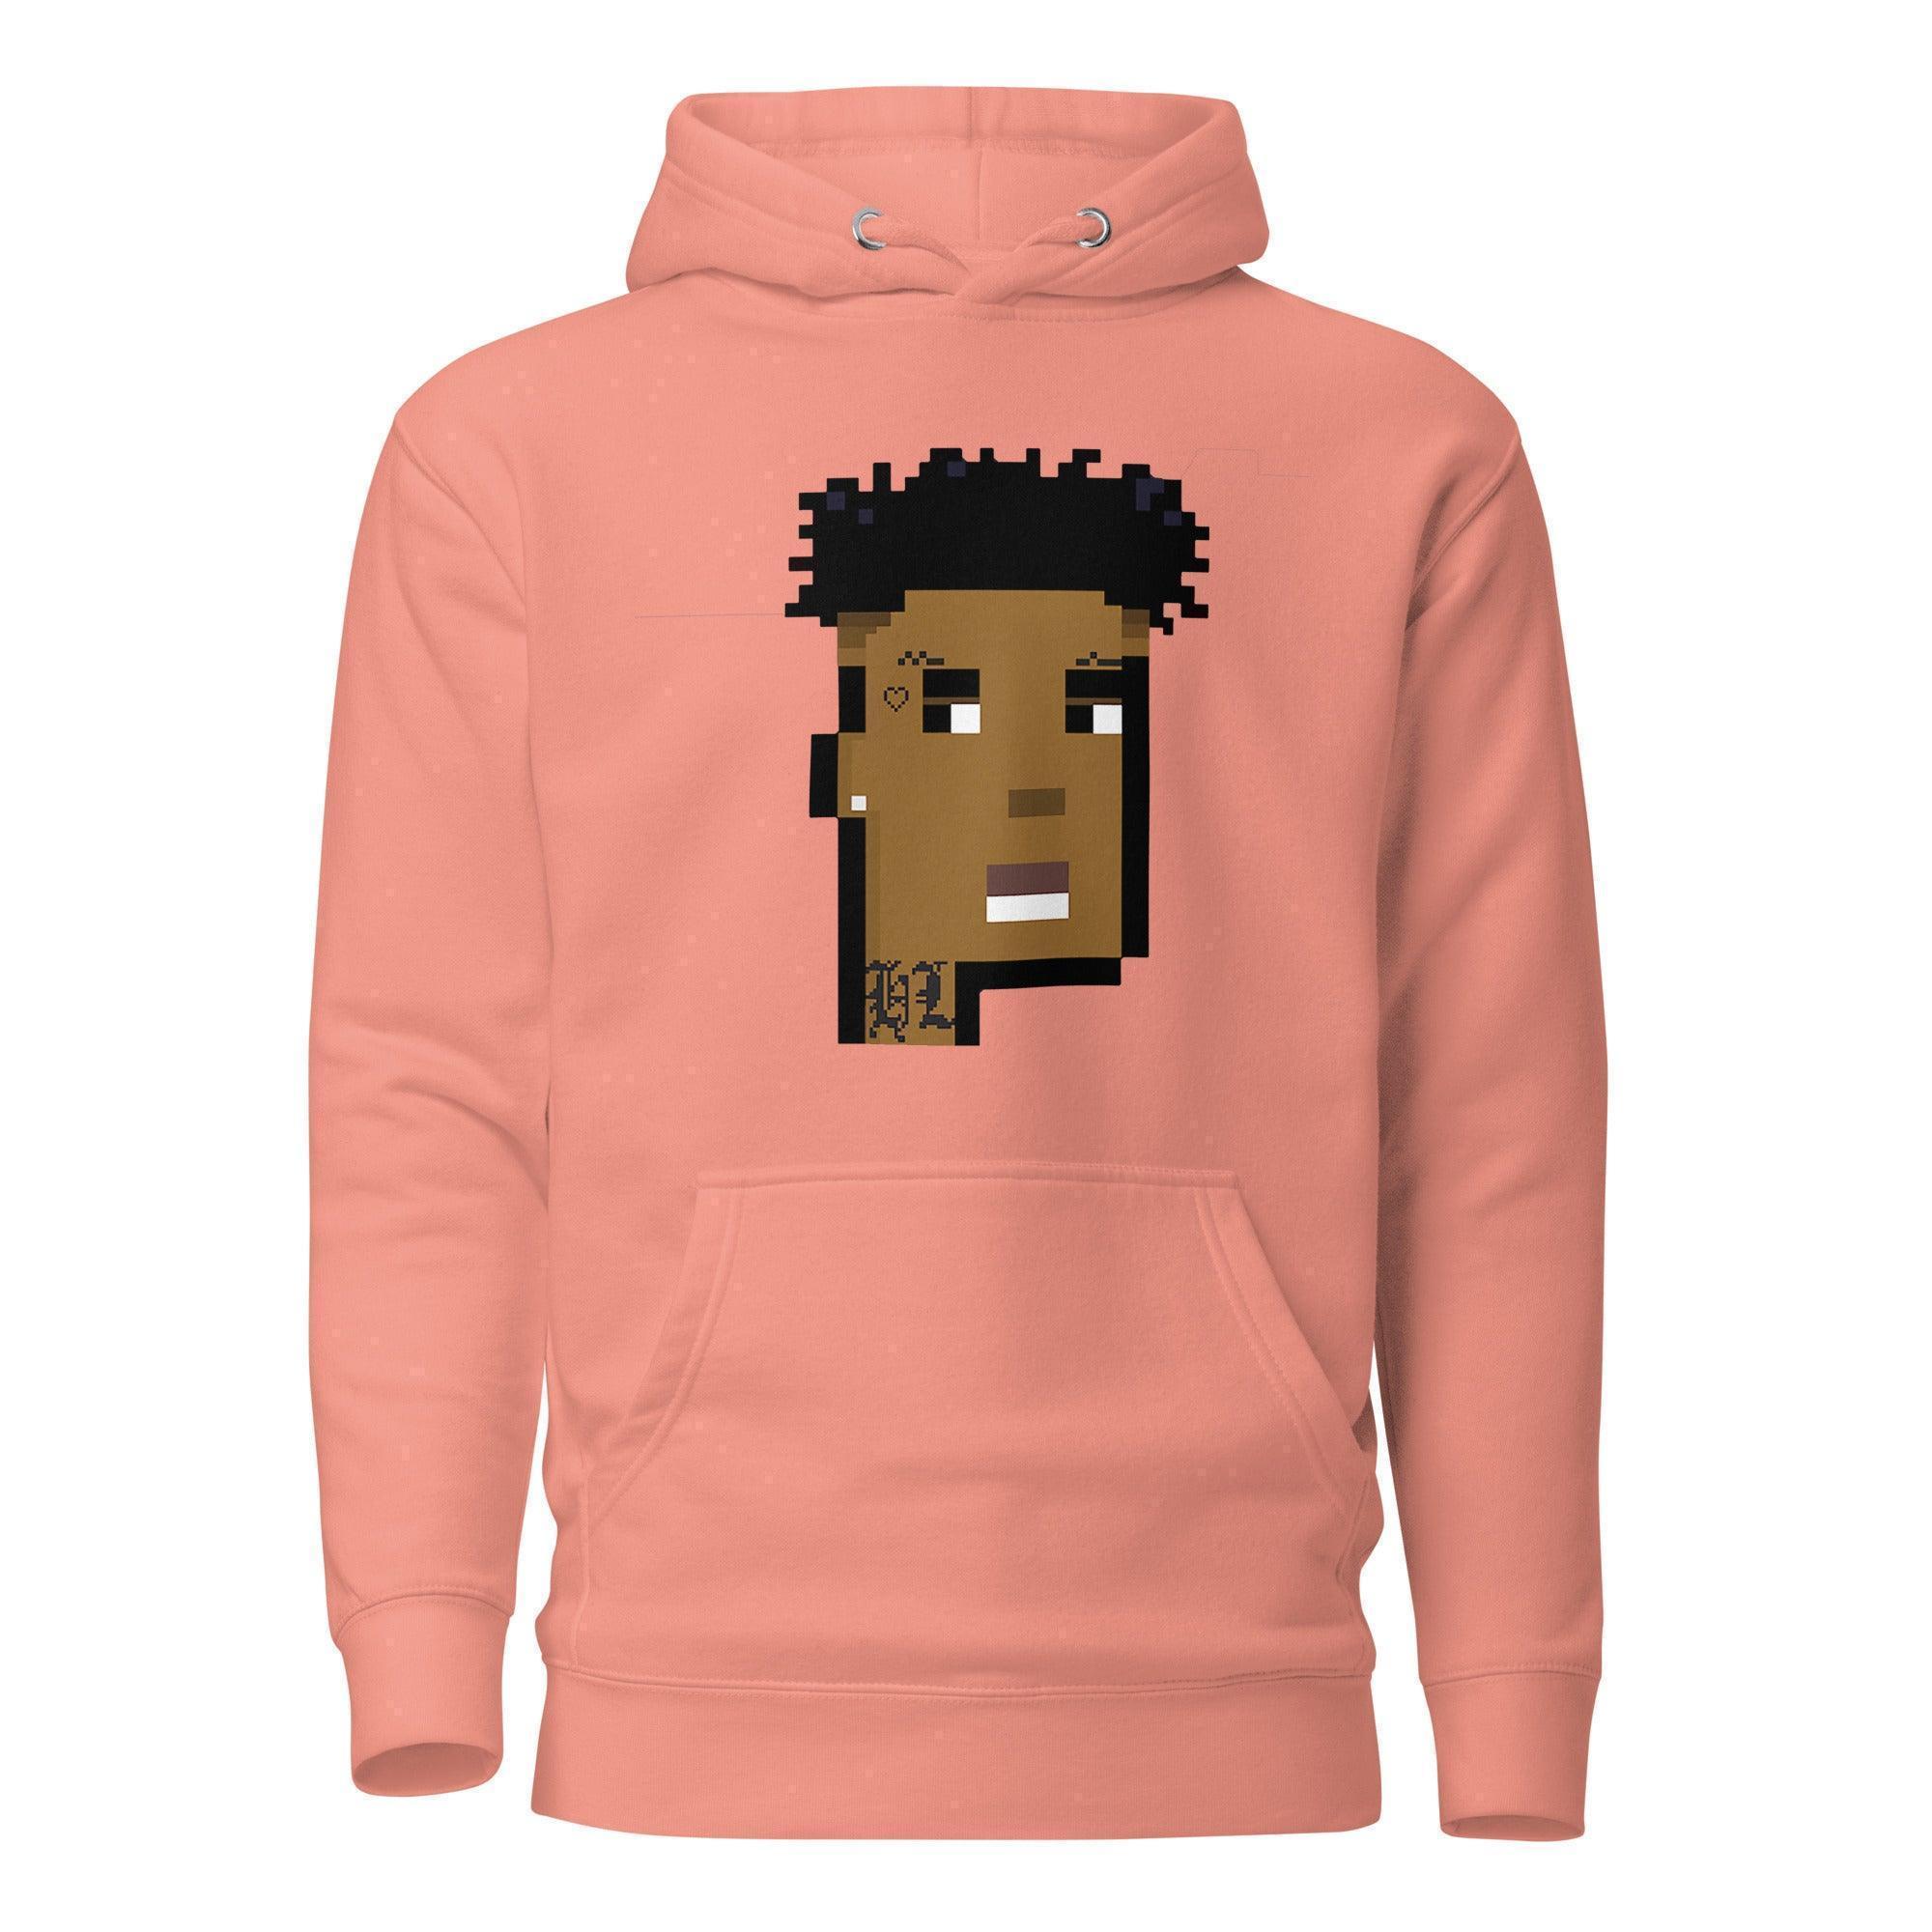 Celebrity Punk 19 Pullover Hoodie - InvestmenTees